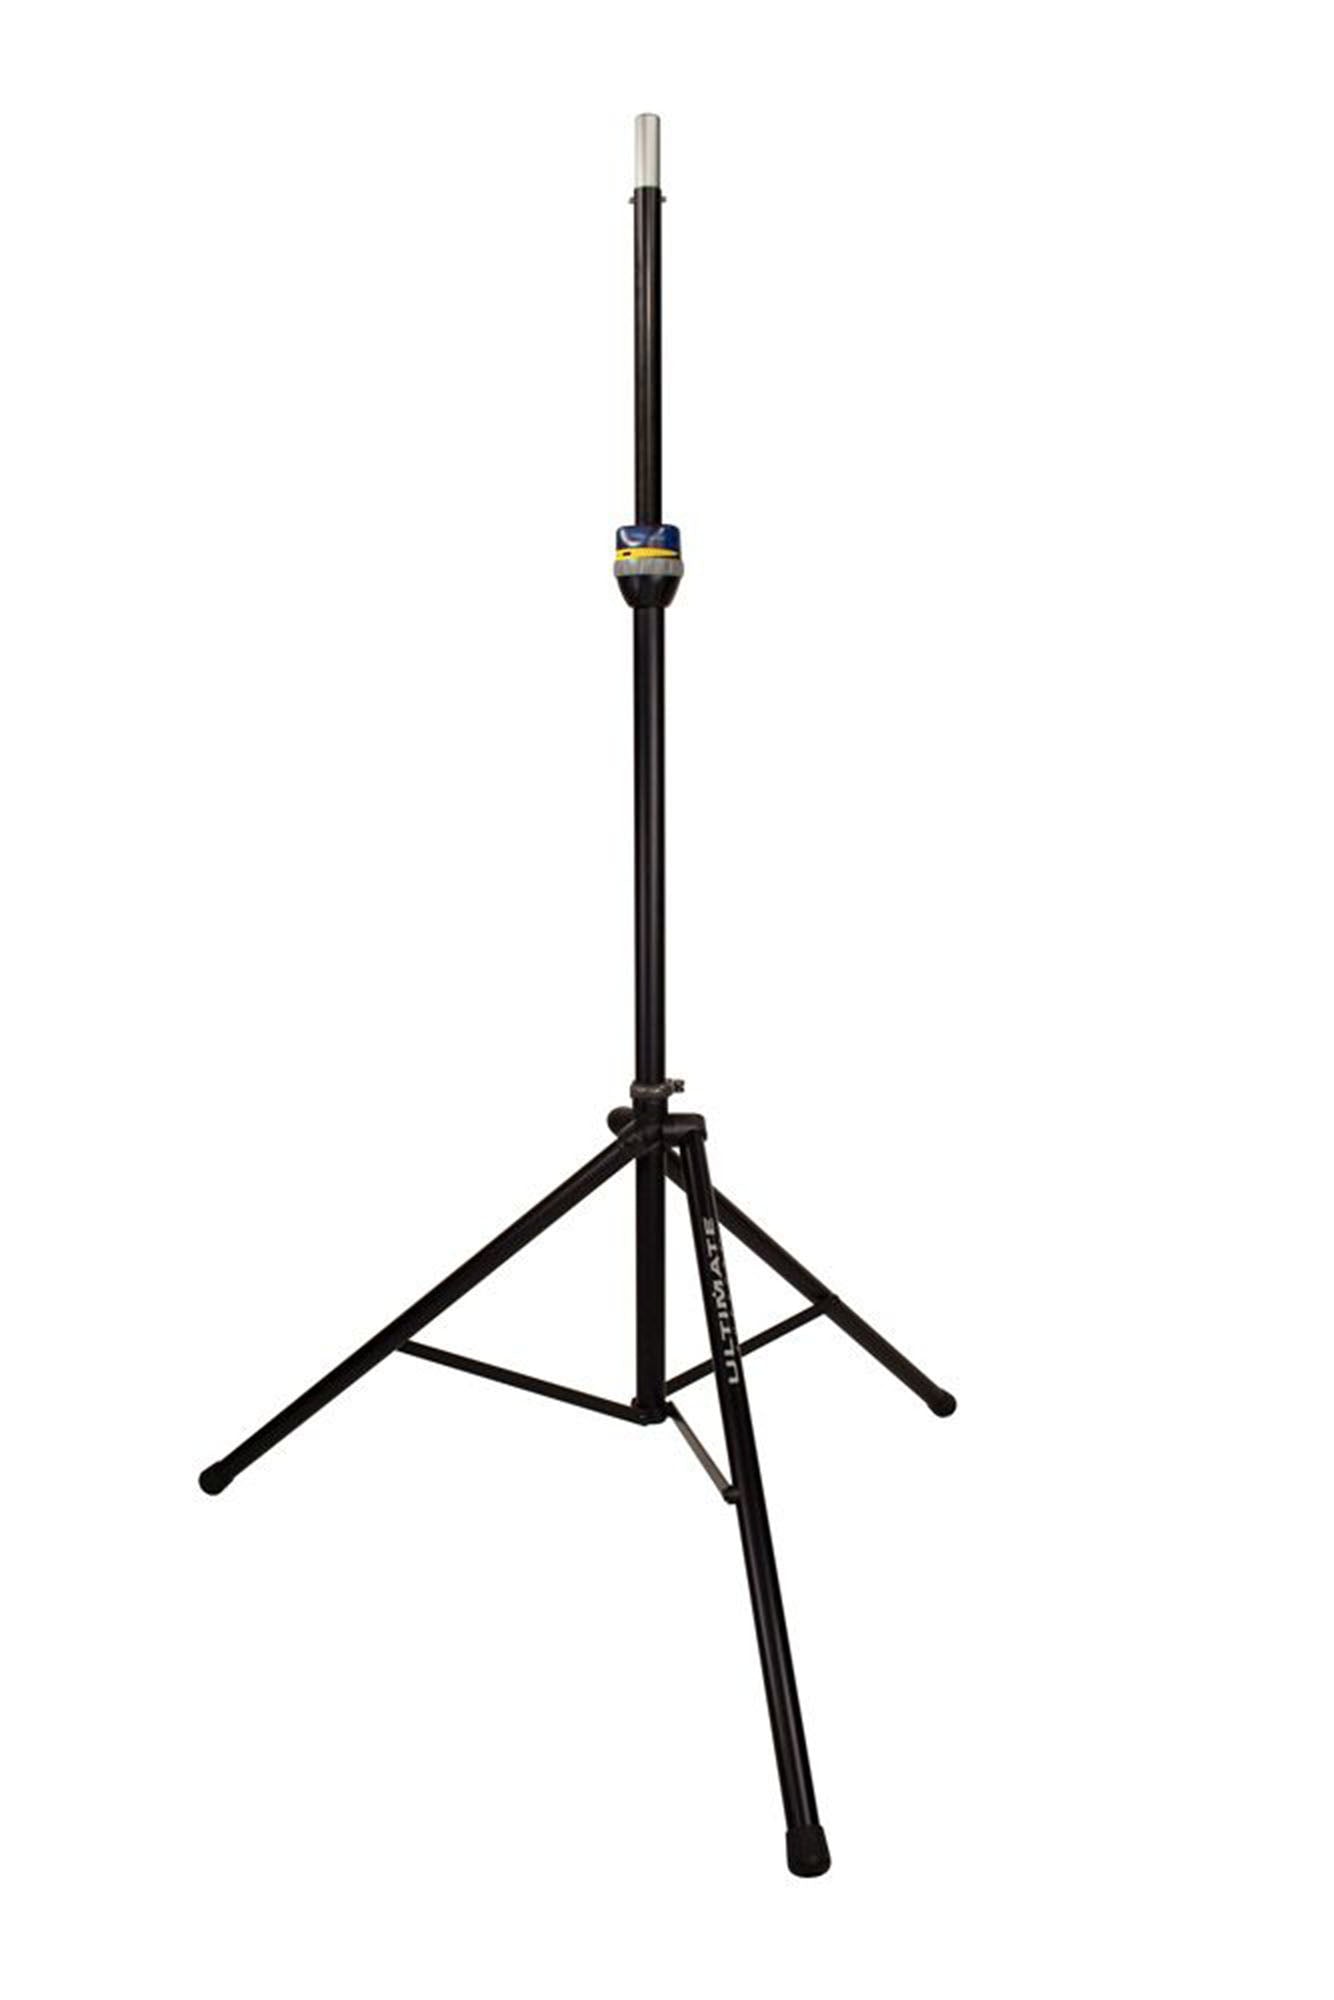 B-Stock: Ultimate Support TS-99B Tall TeleLock Stand - Hollywood DJ